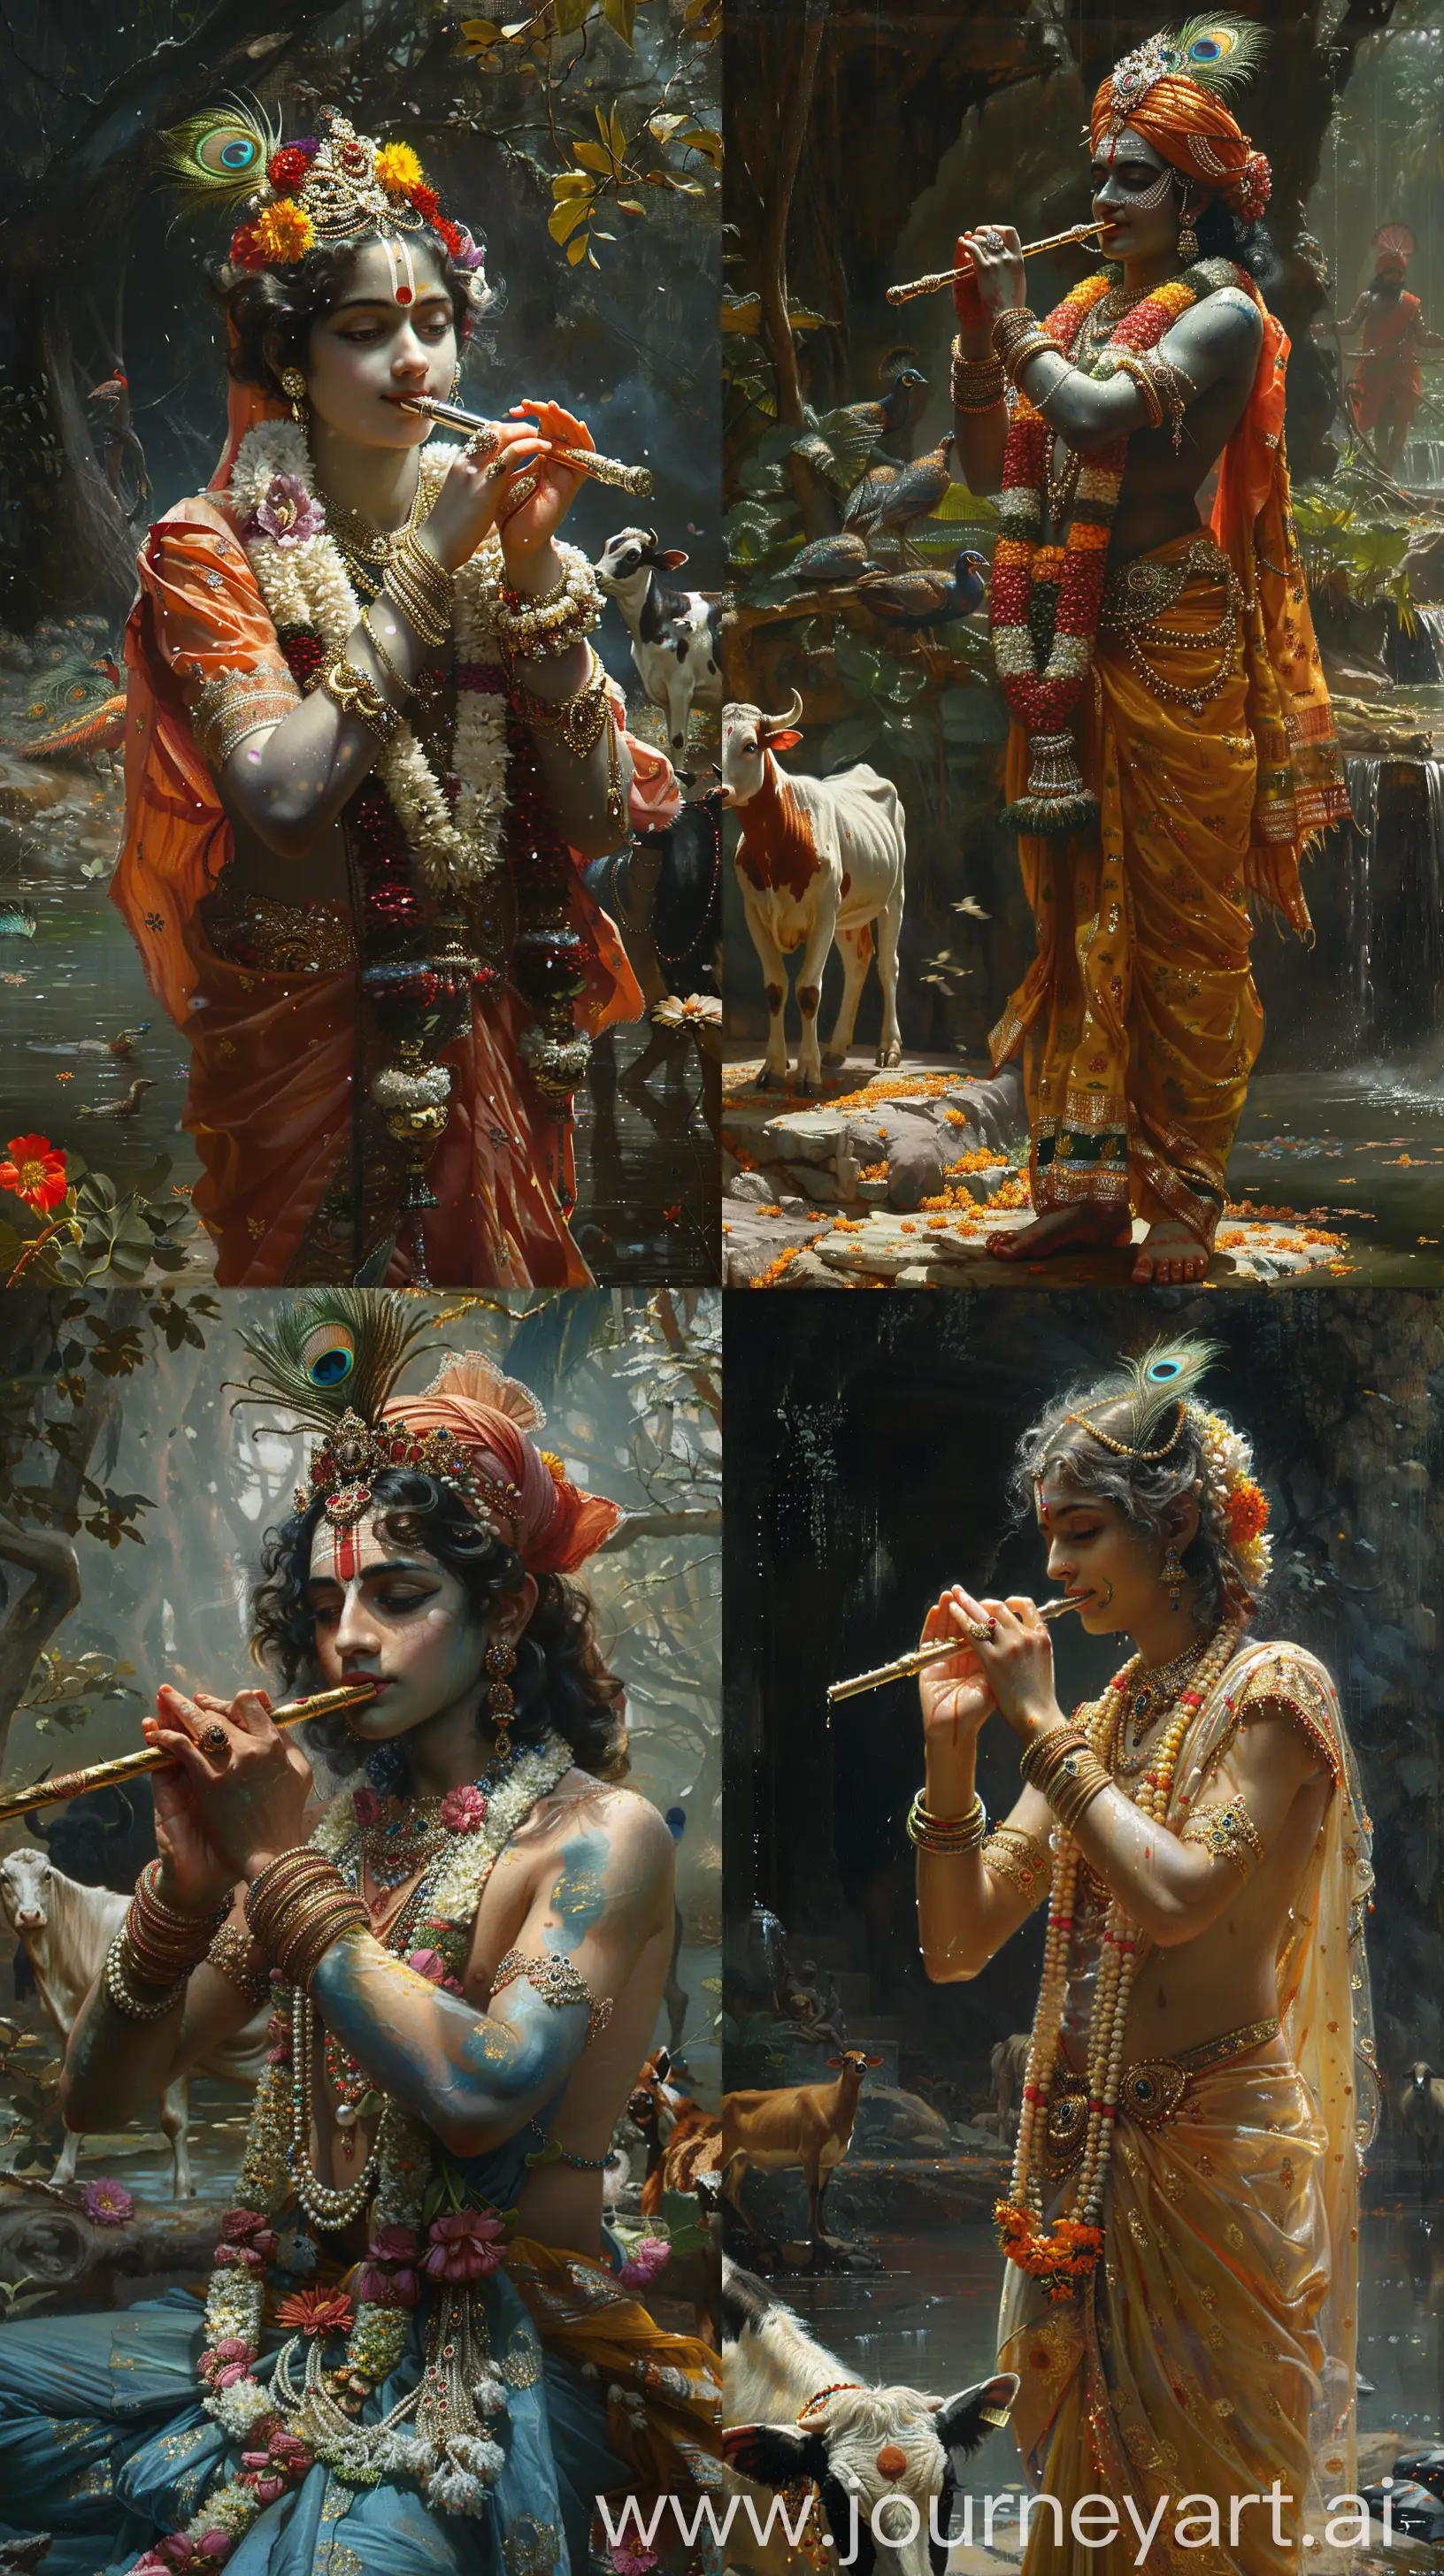 Divine-Portrait-of-Lord-Krishna-Playing-Flute-in-Serene-Natural-Setting